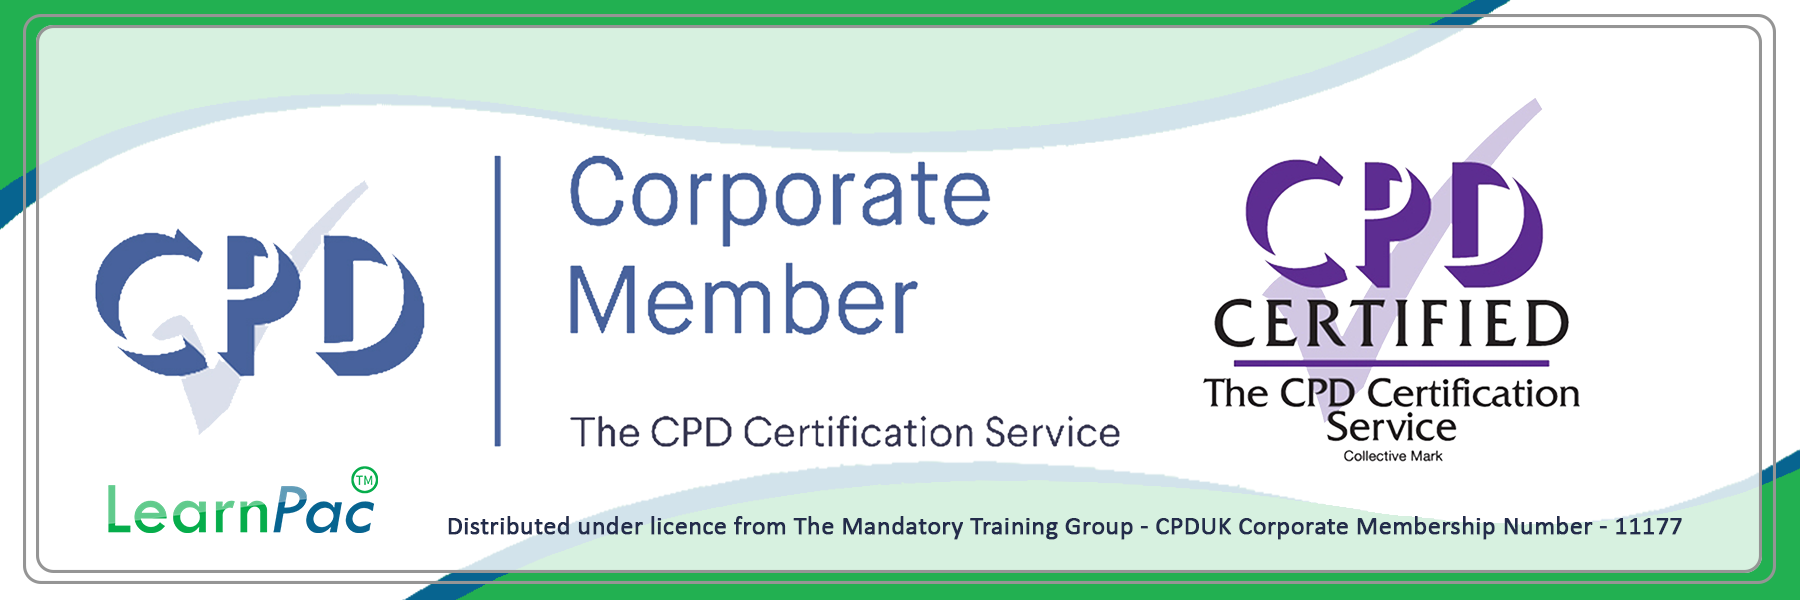 Healthcare Assistant Training - E-Learning Courses with Certificates - CPD Certified - LearnPac Systems UK -